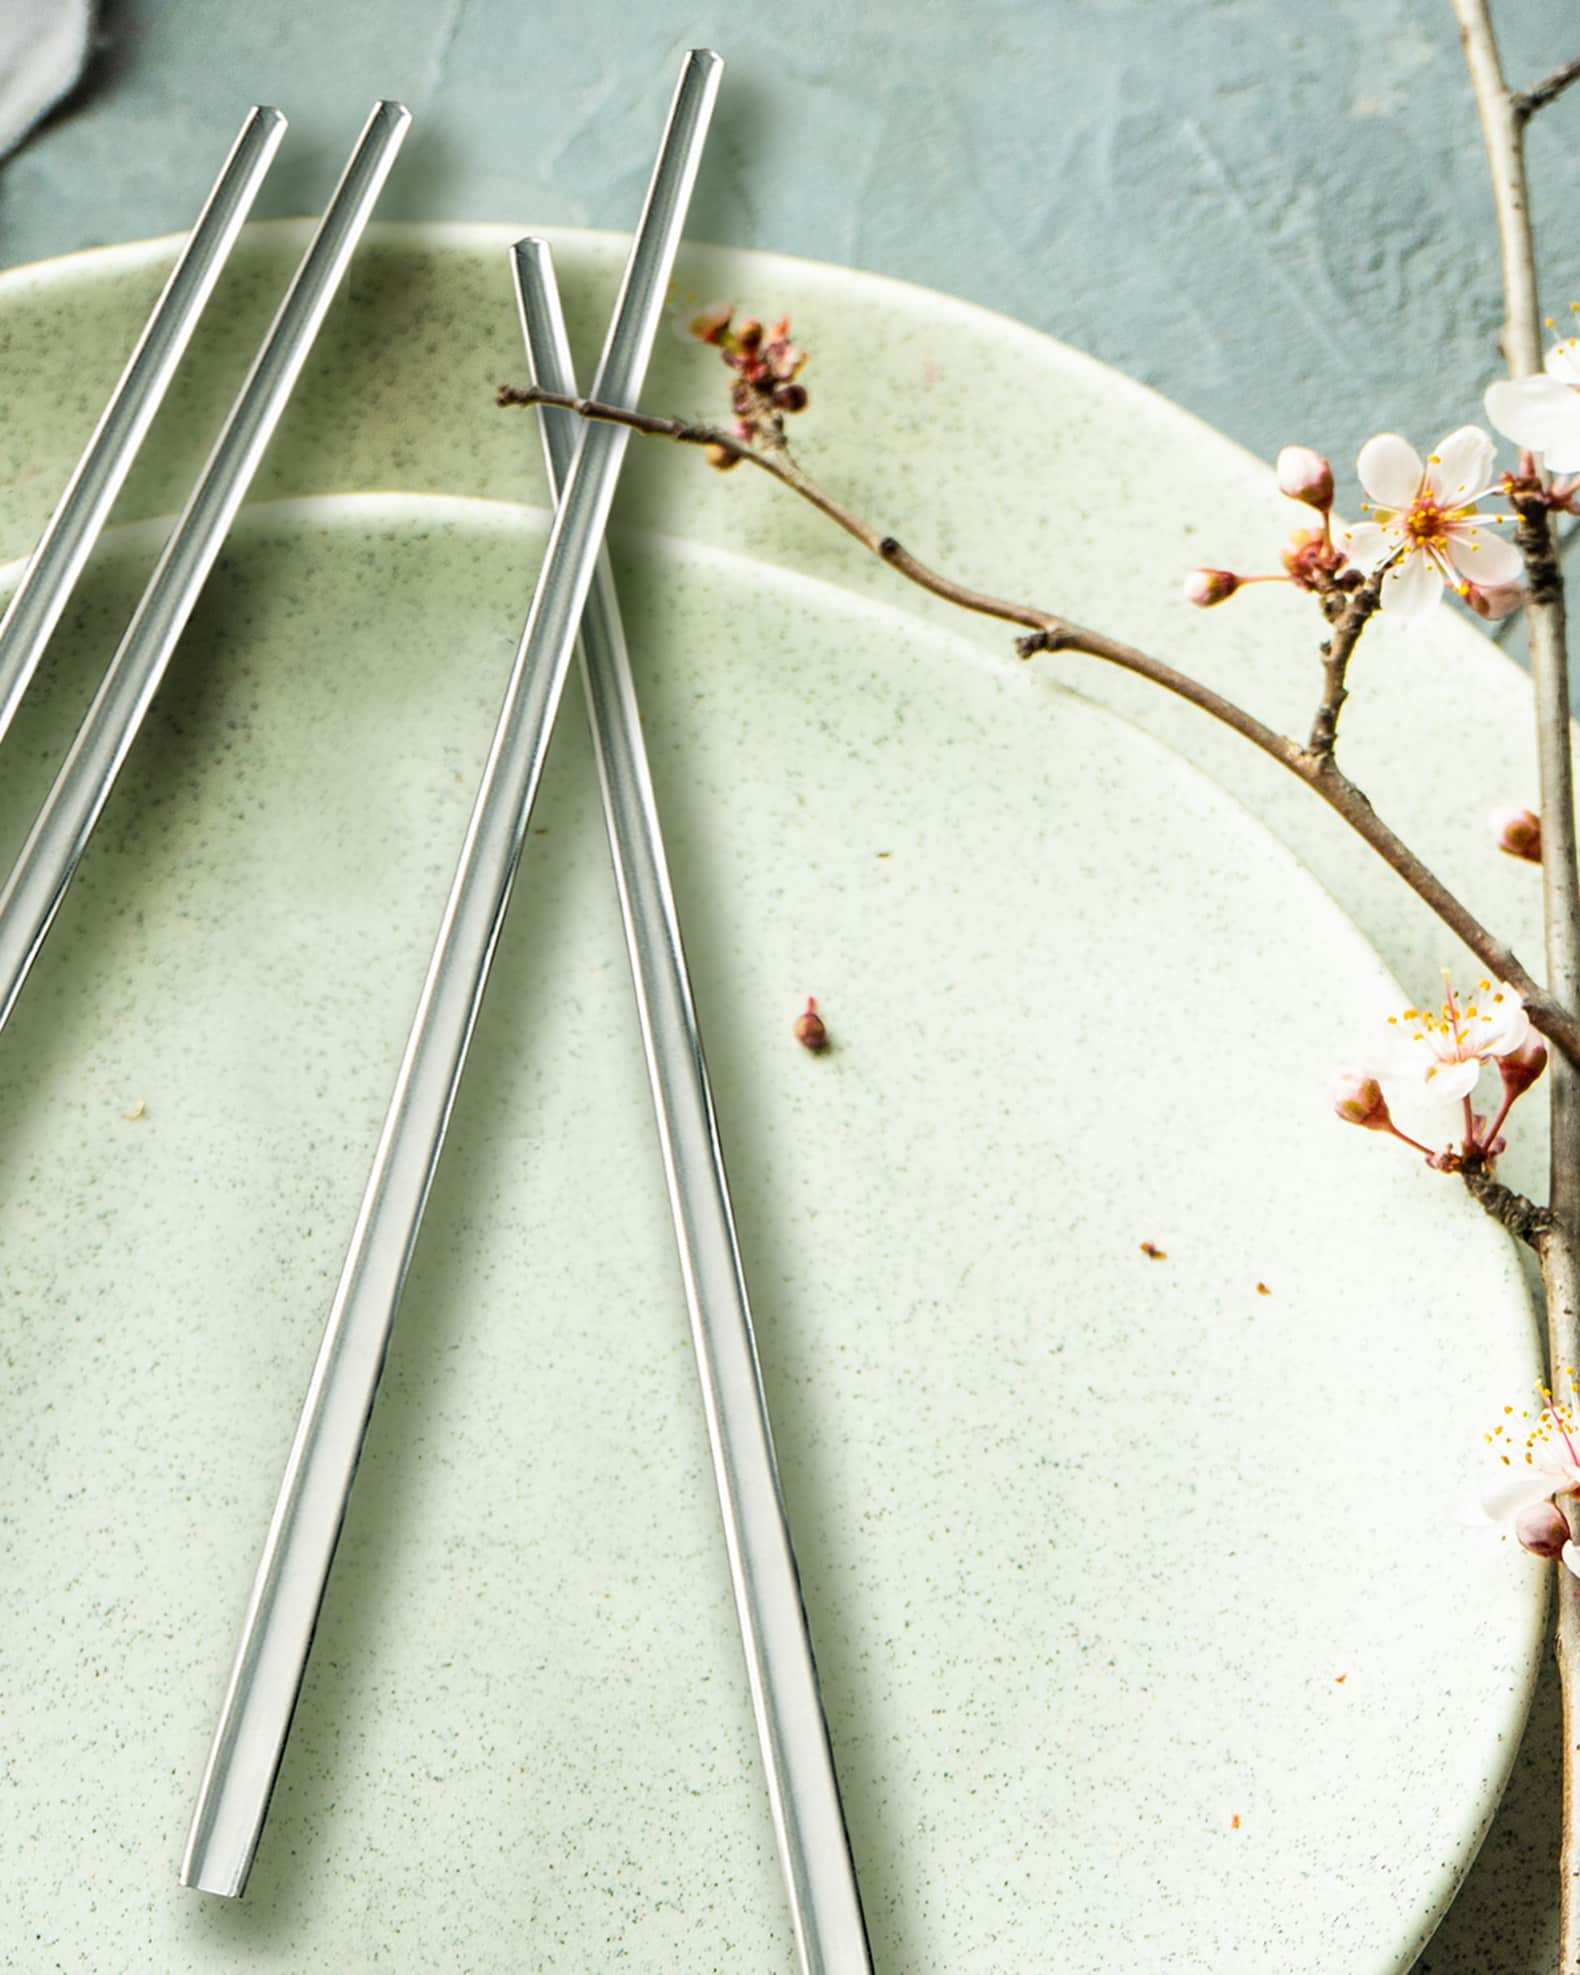 Why Are Korean Chopsticks Metal and Flat?